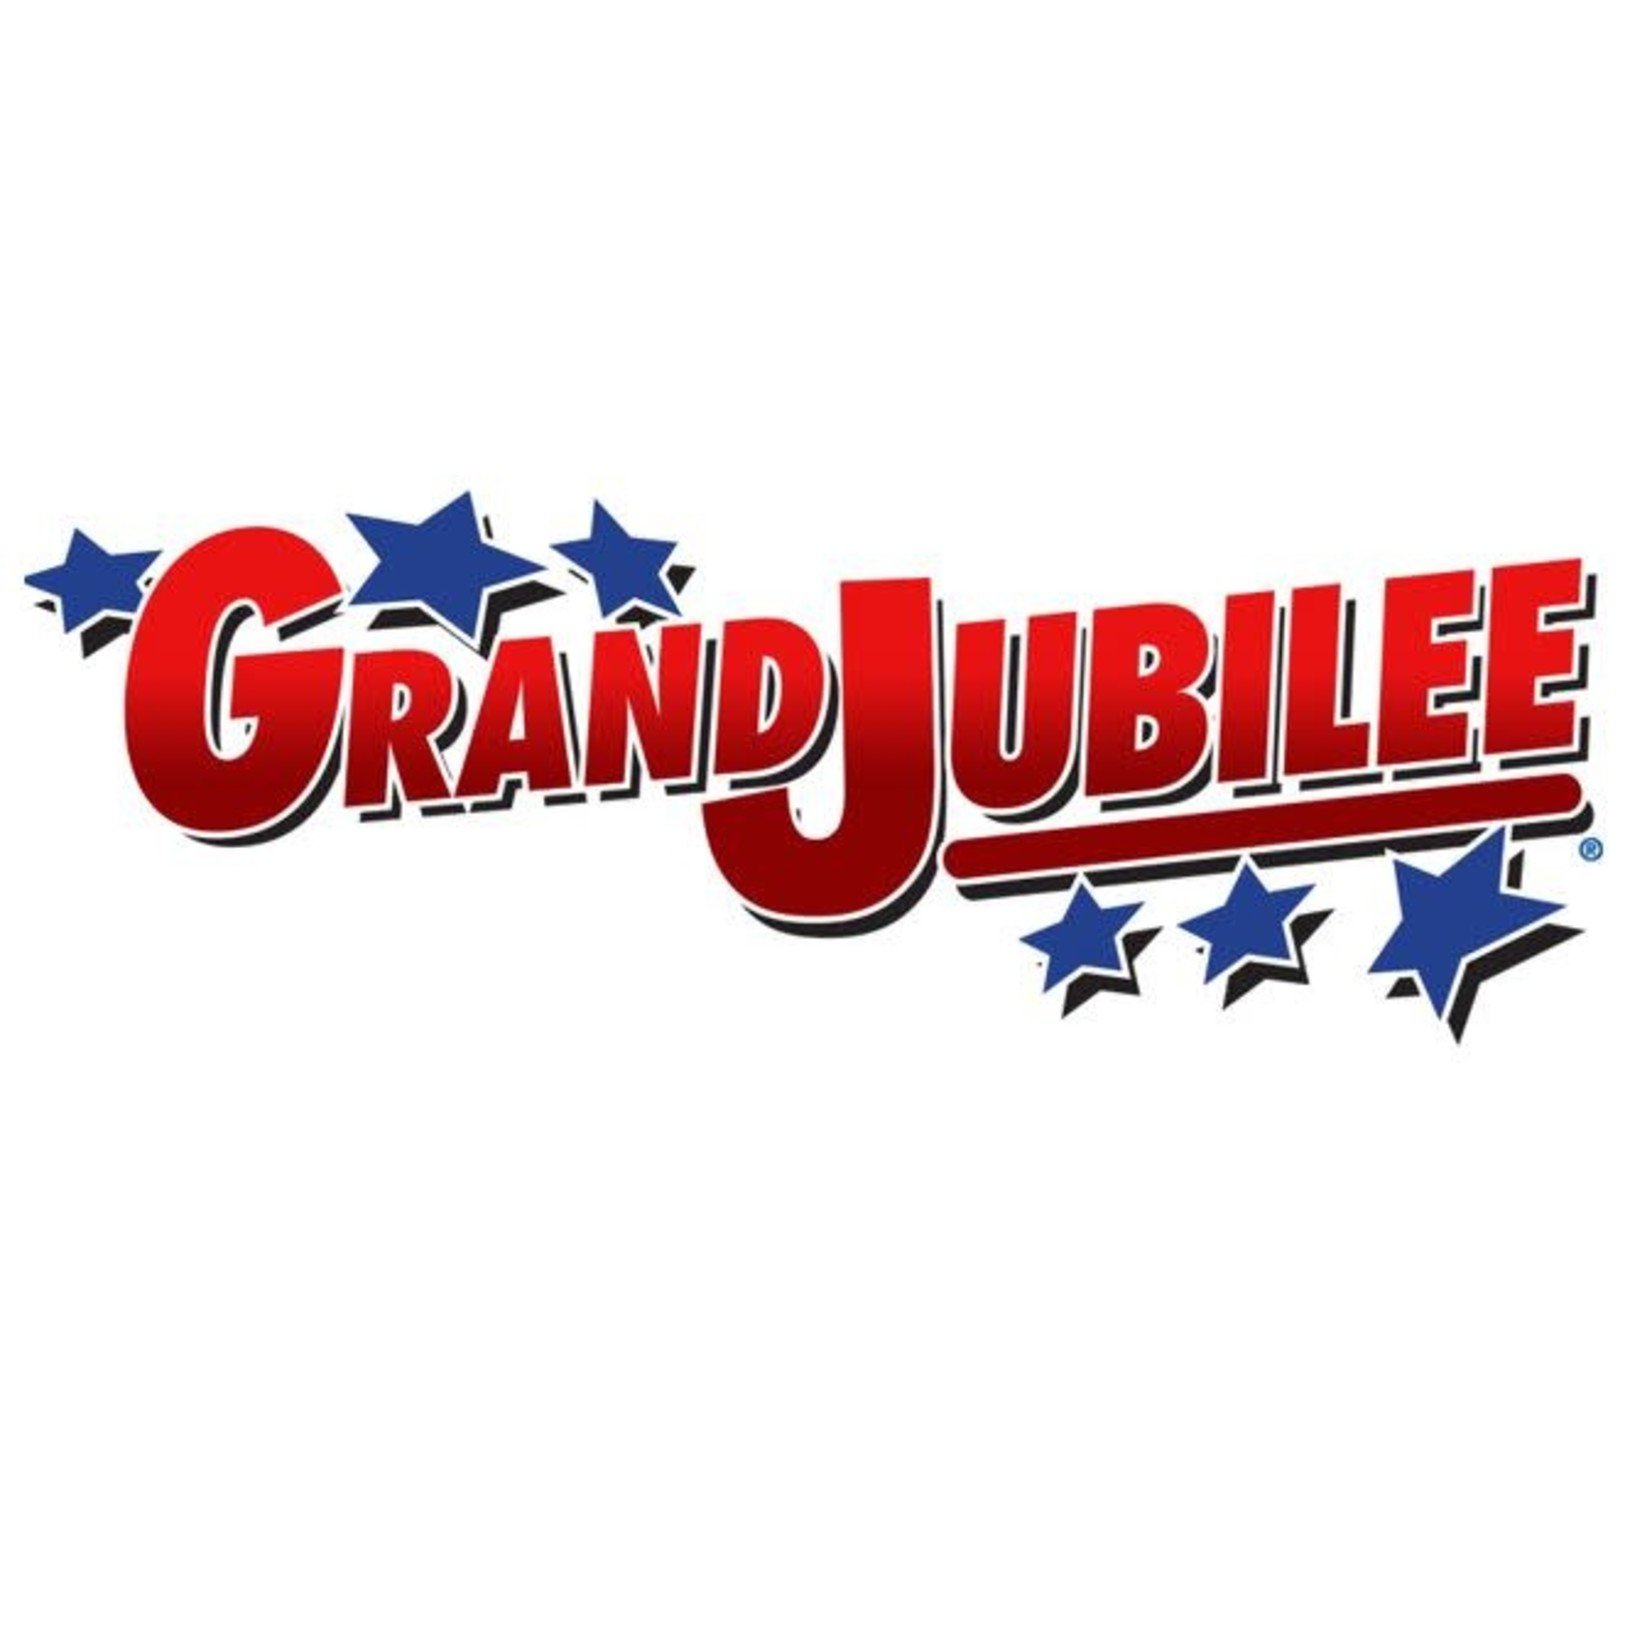 MO-Branson-Grand Country Music Hall Show MO-Branson-Grand Country Music Hall Show $95.10 Pair Grand Jubilee Tickets